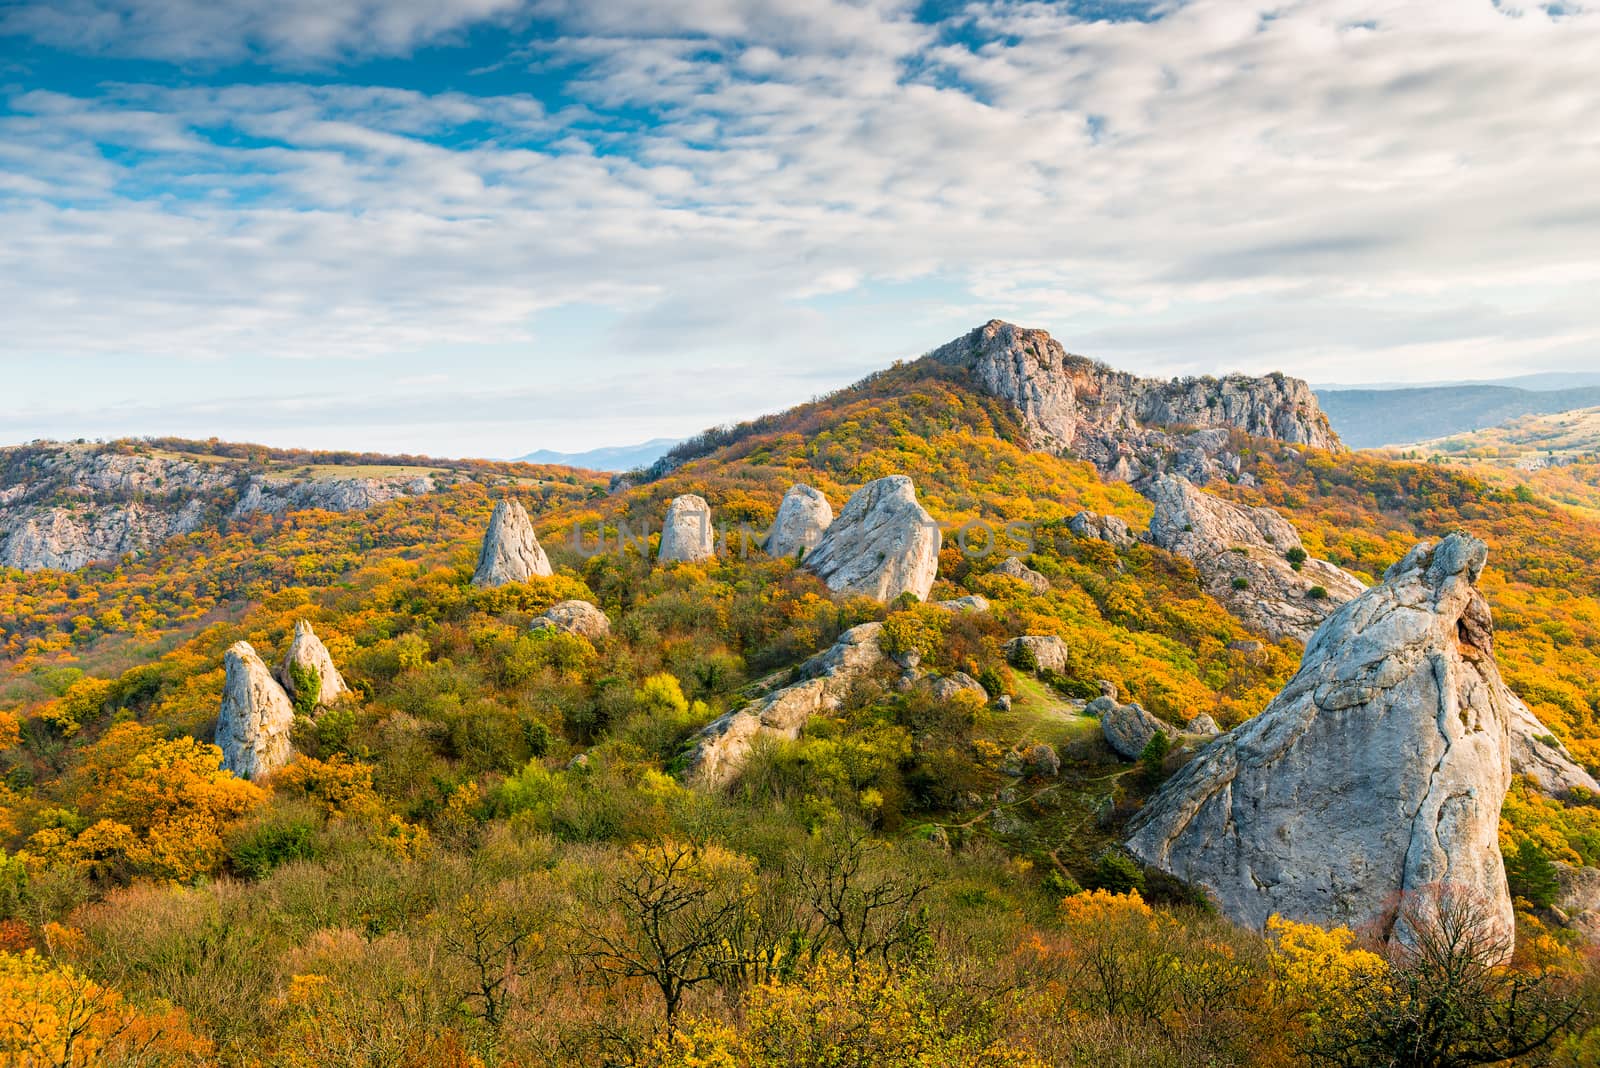 Sightseeing of the Crimea - The Temple of the Sun in an autumn s by kosmsos111